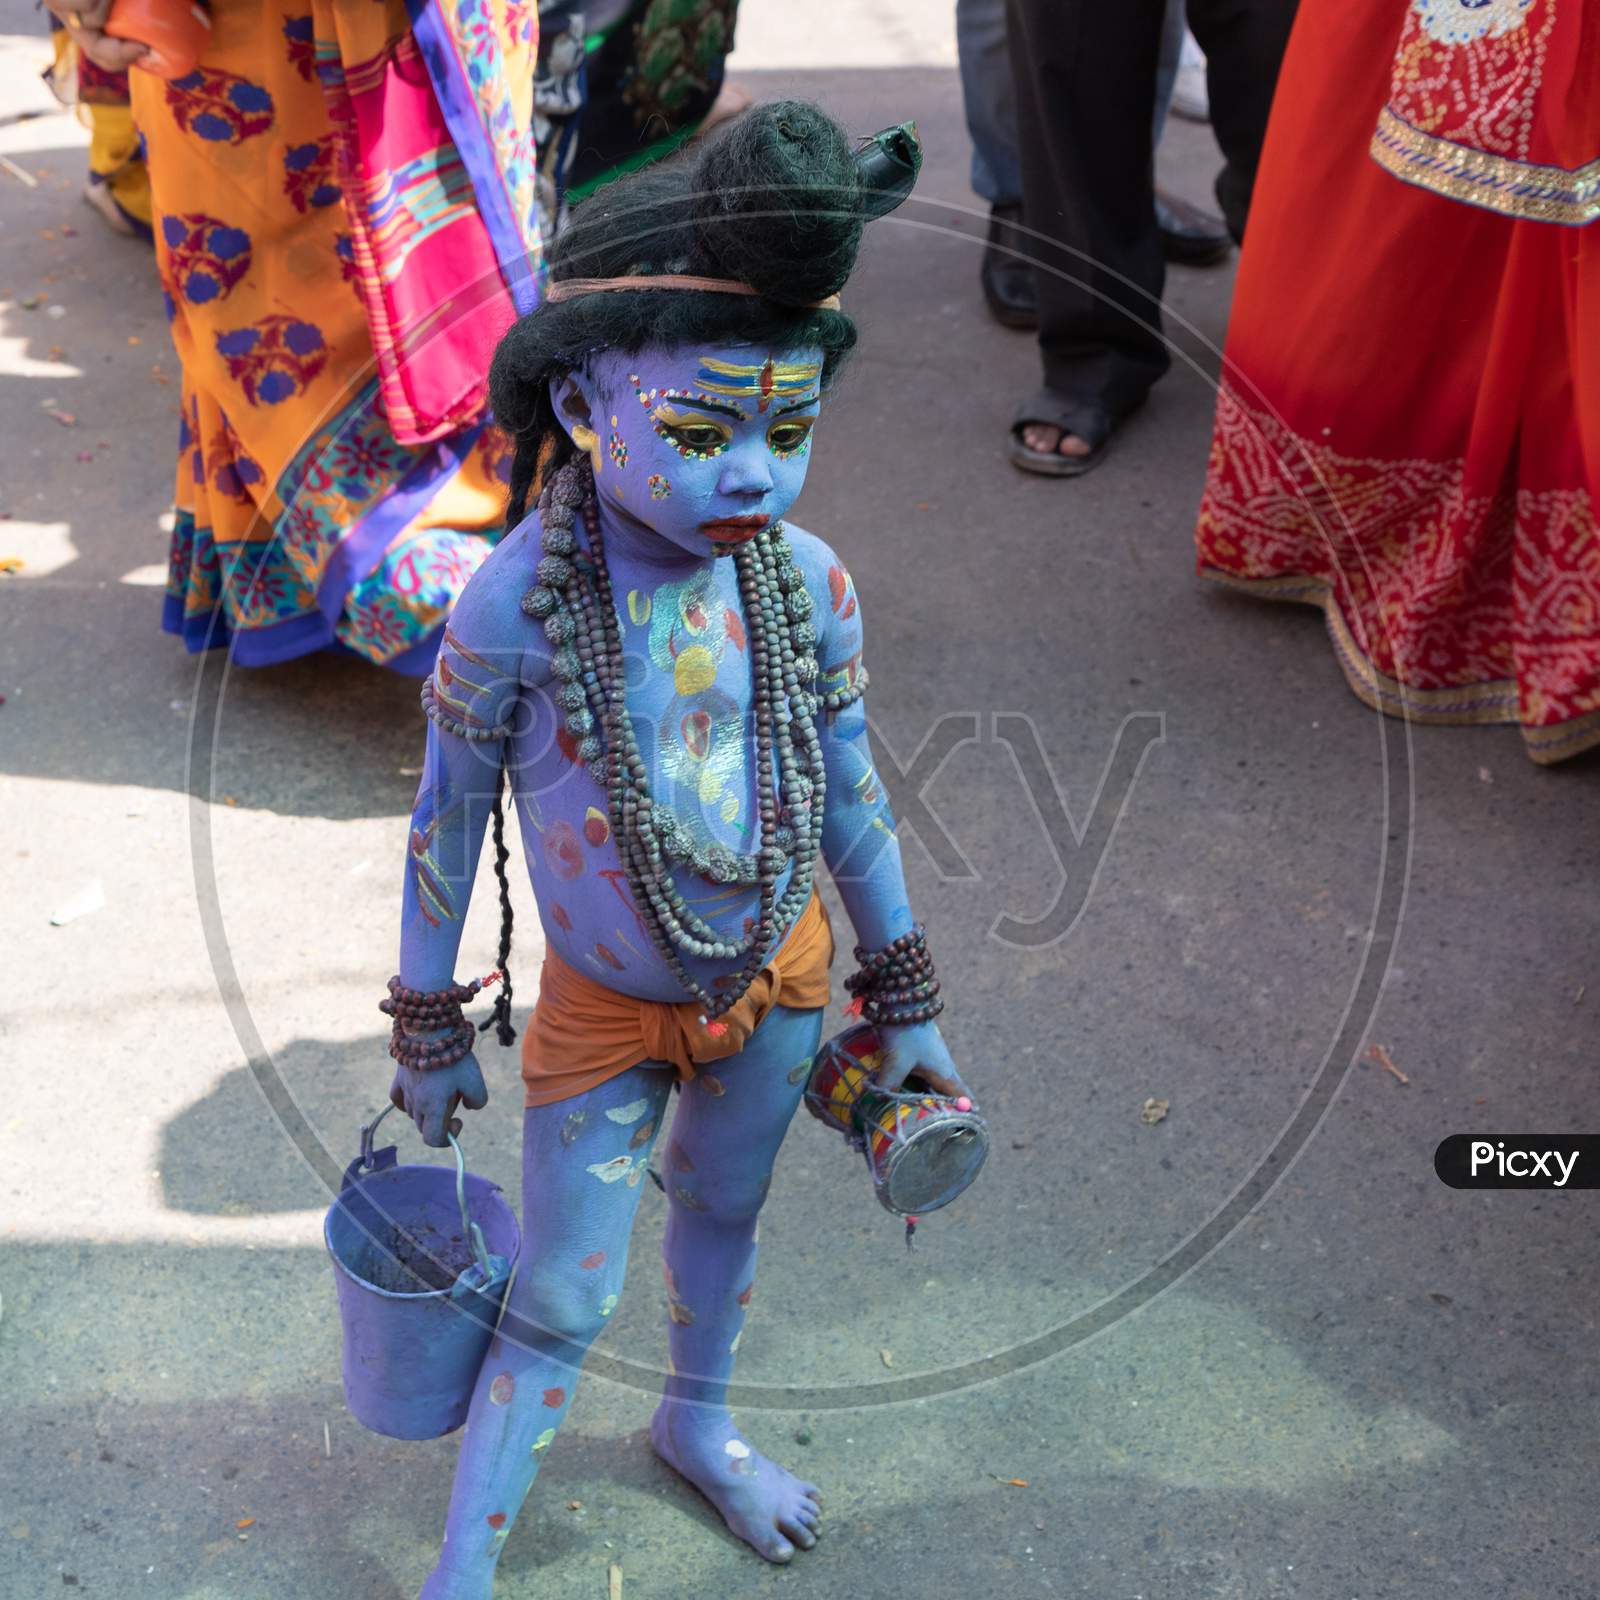 A little boy with his body painted blue to depict hindu god Shive on the streets